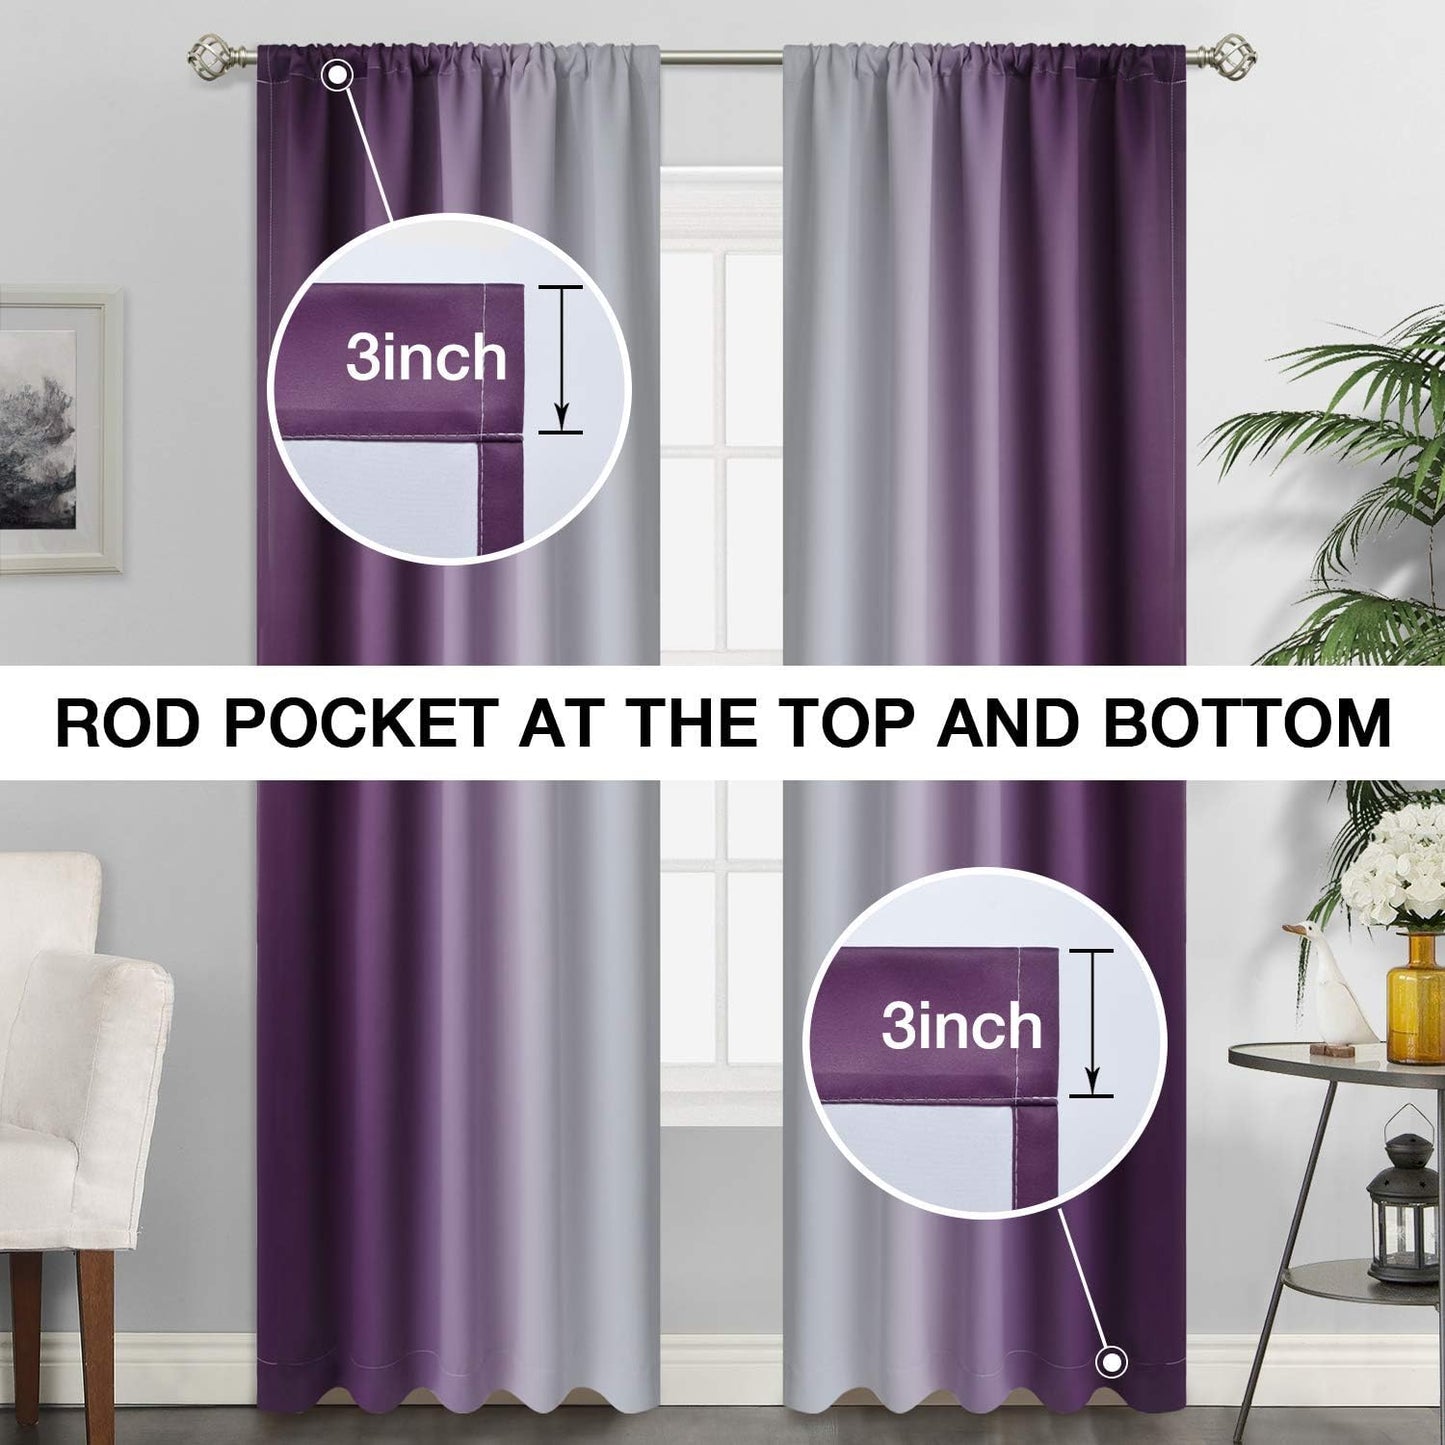 Simplehome Ombre Room Darkening Curtains for Bedroom, Light Blocking Gradient Purple to Greyish White Thermal Insulated Rod Pocket Window Curtains Drapes for Living Room,2 Panels, 52X84 Inches Length  SimpleHome   